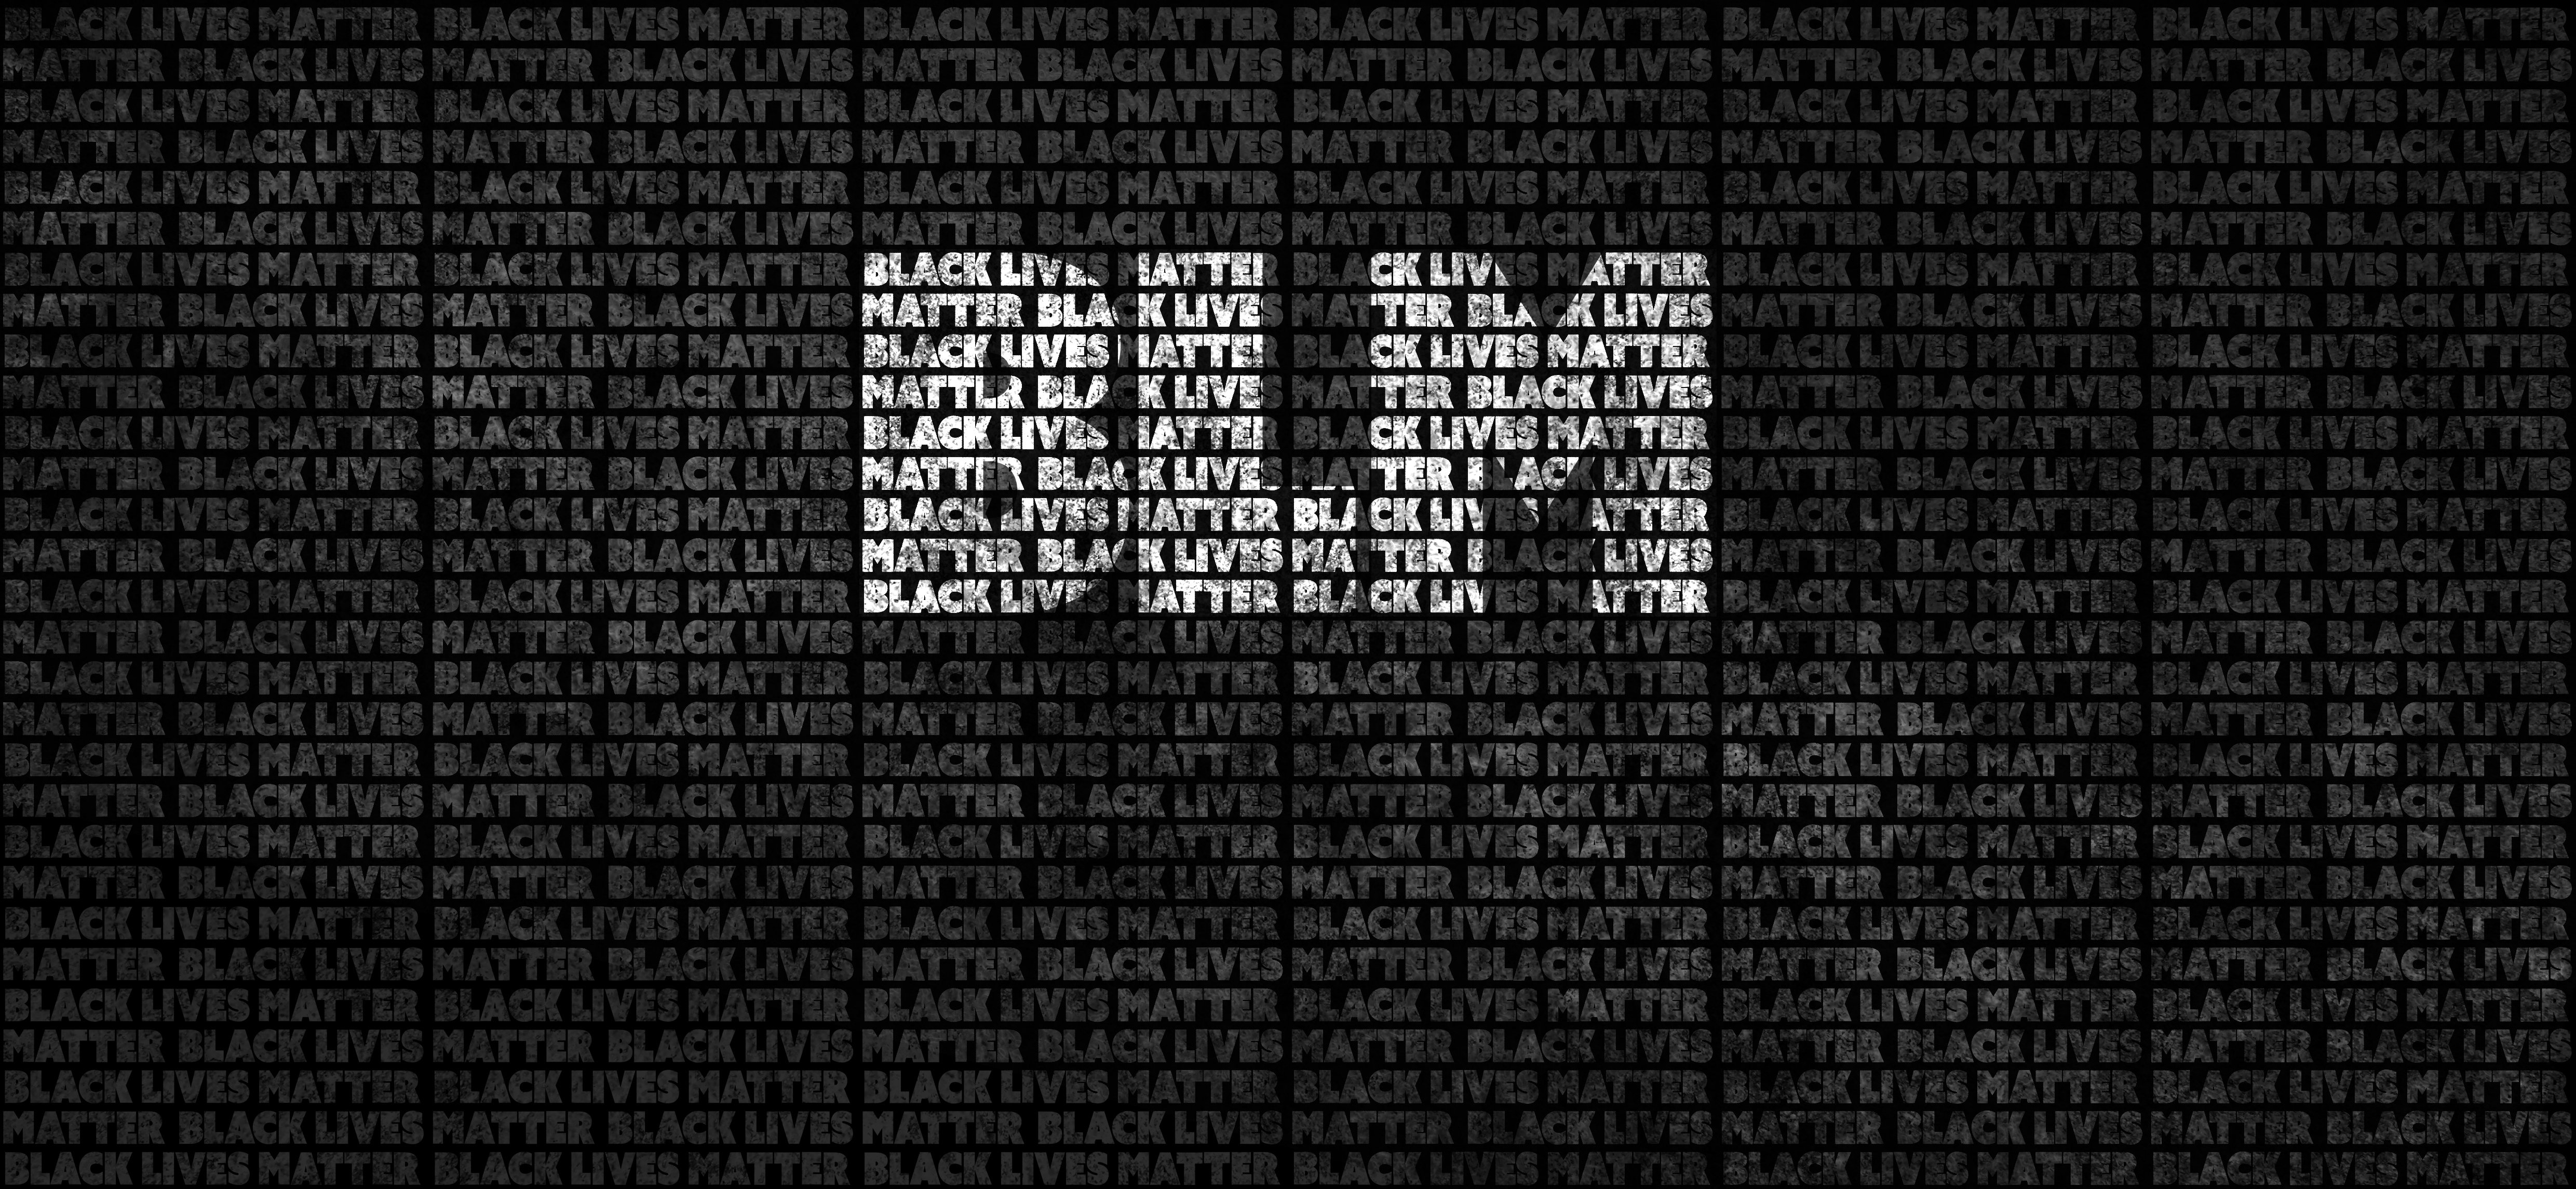 A black and white colored Black Lives Matter (BLM) background graphic illustration with BLM in the center.